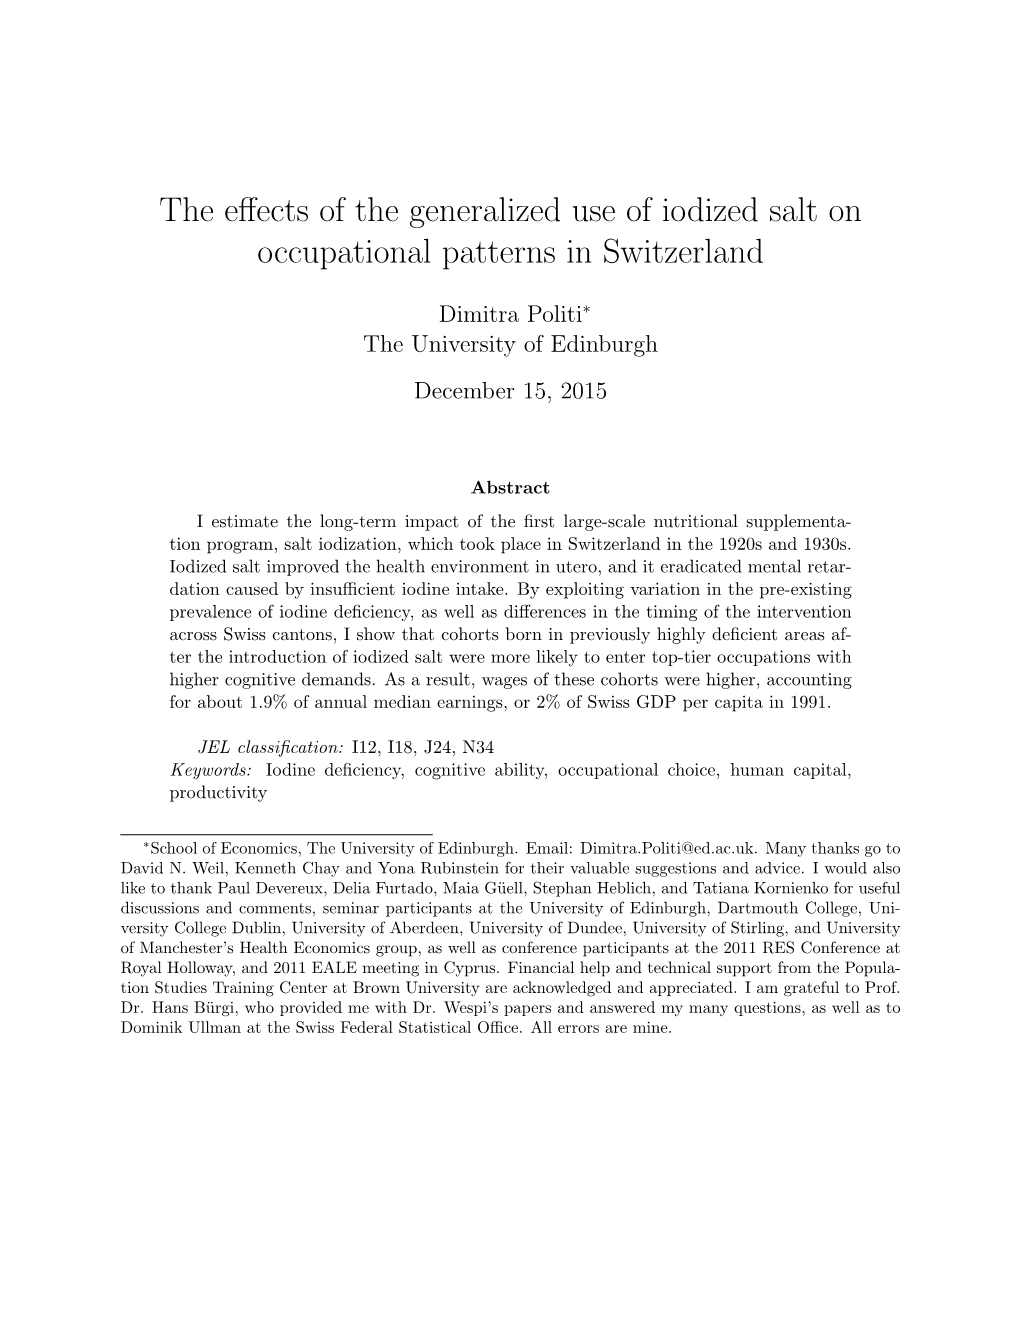 The Effects of the Generalized Use of Iodized Salt on Occupational